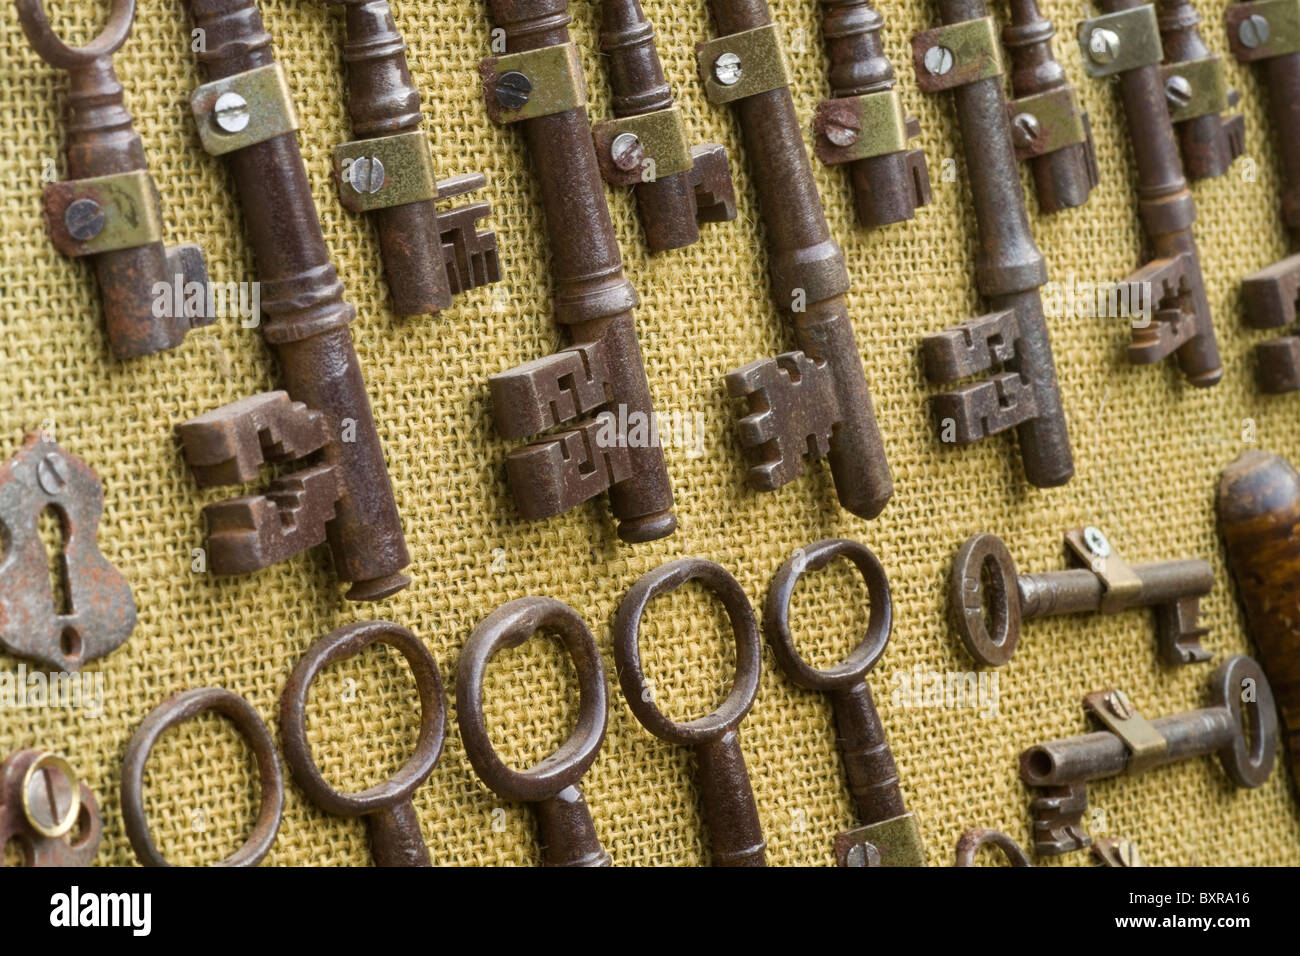 A close up of some of the keys and other objects on a locksmiths display board Stock Photo